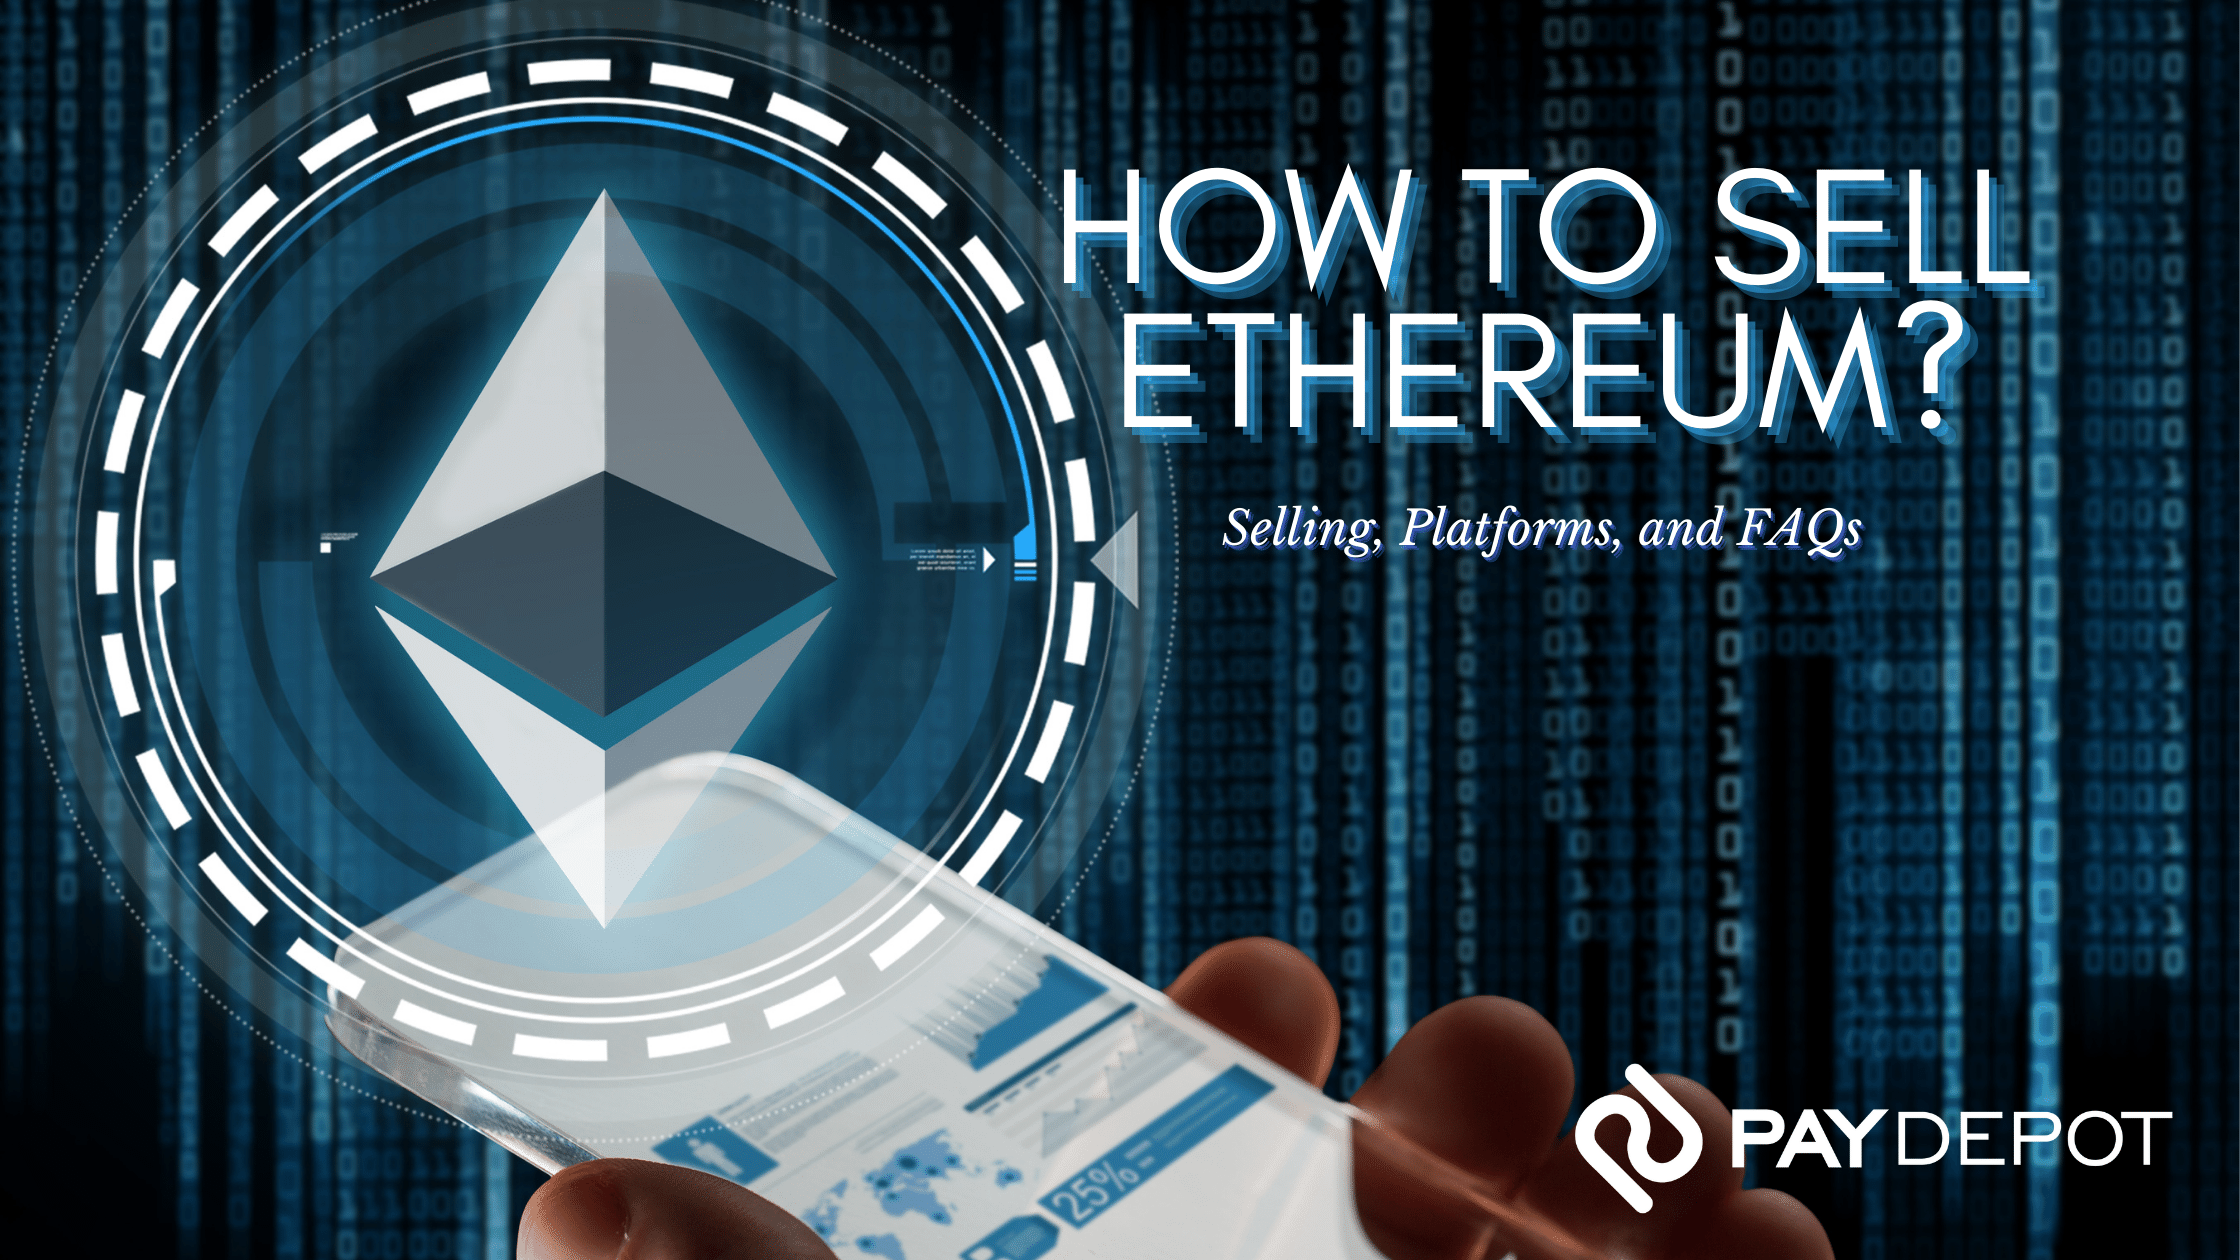 Vender ethereum investing in cryptocurrencies the ultimate guide